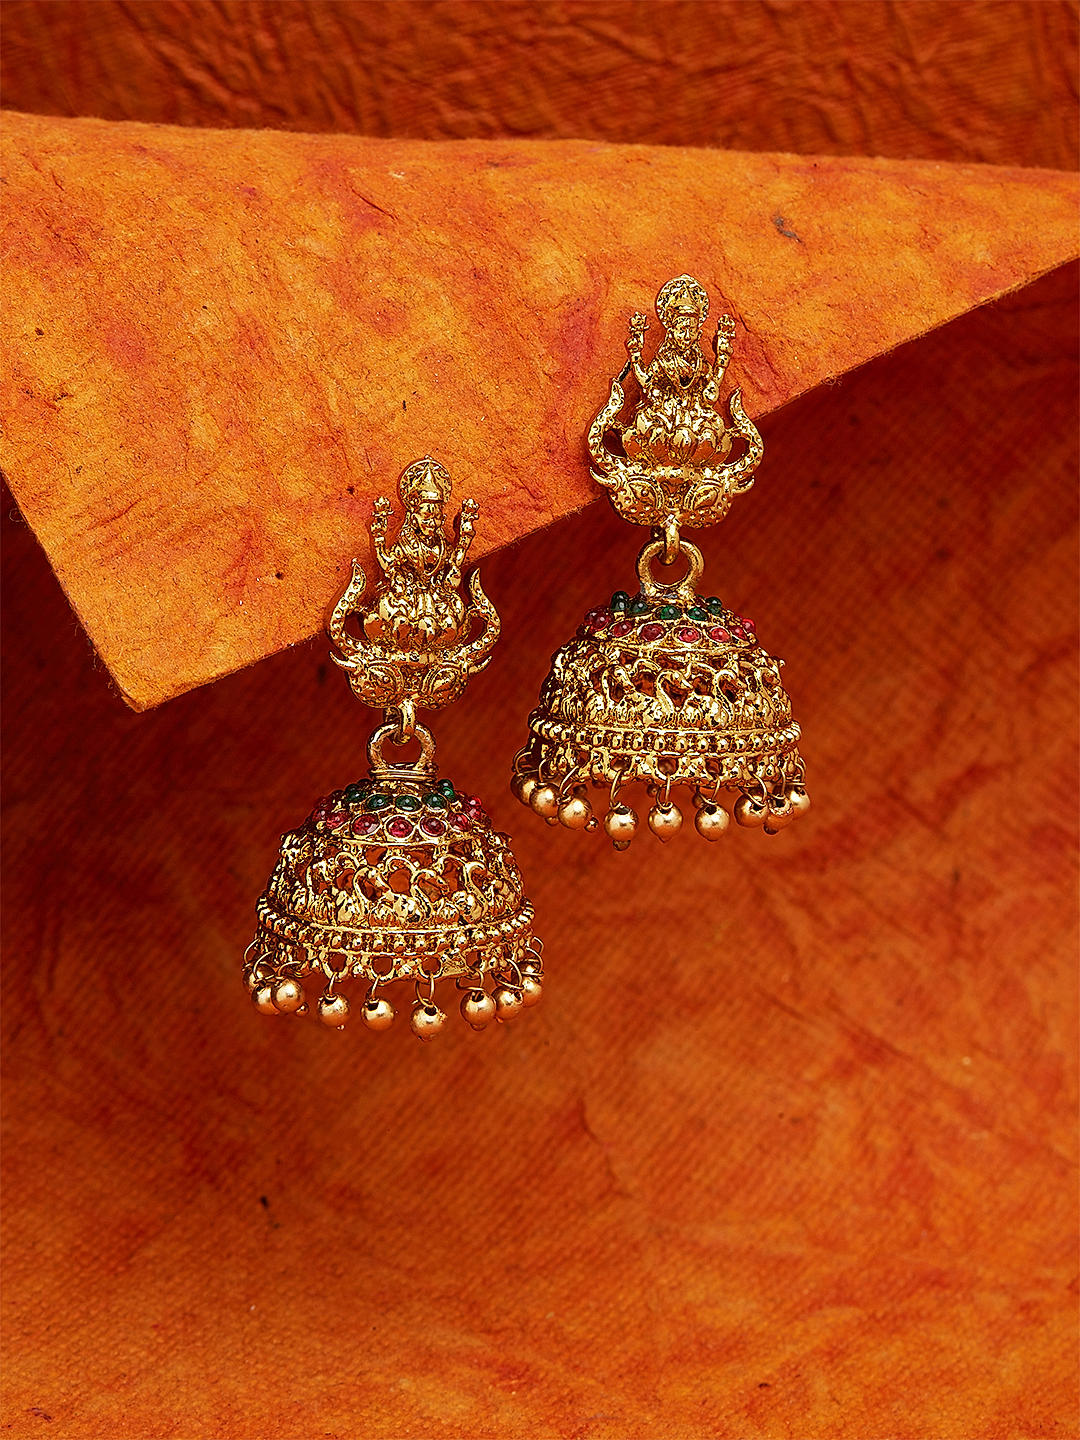 Indian Bollywood Style Gold Plated Choker Necklace Earrings Temple Jewelry  Set | eBay